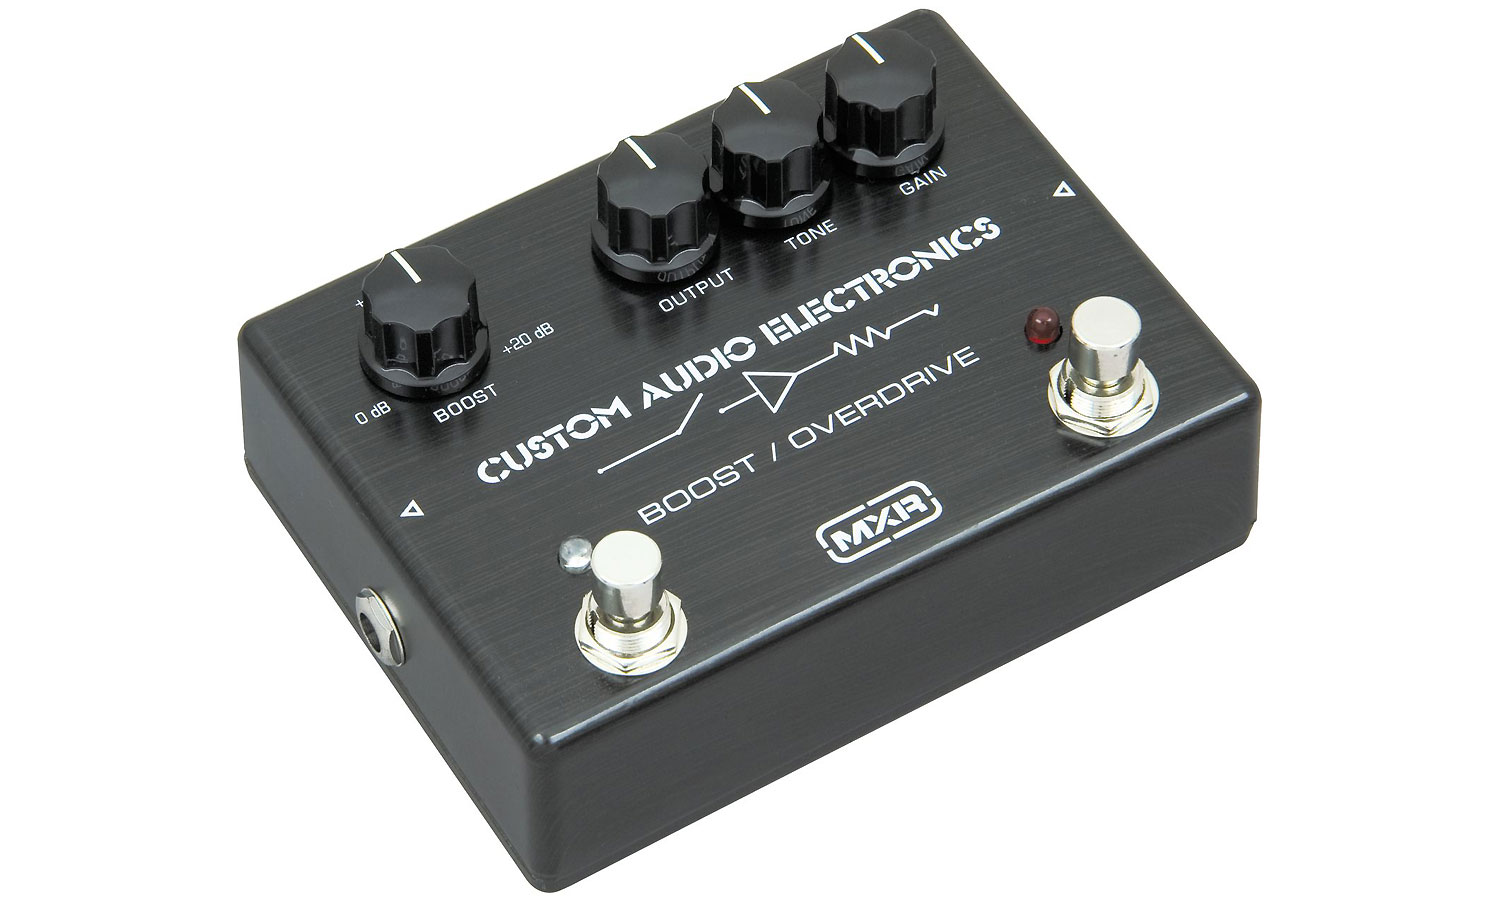 Mxr Mc402 Cae Custom Audio Electronics Boost Overdrive - Volume/boost/expression effect pedaal - Variation 1